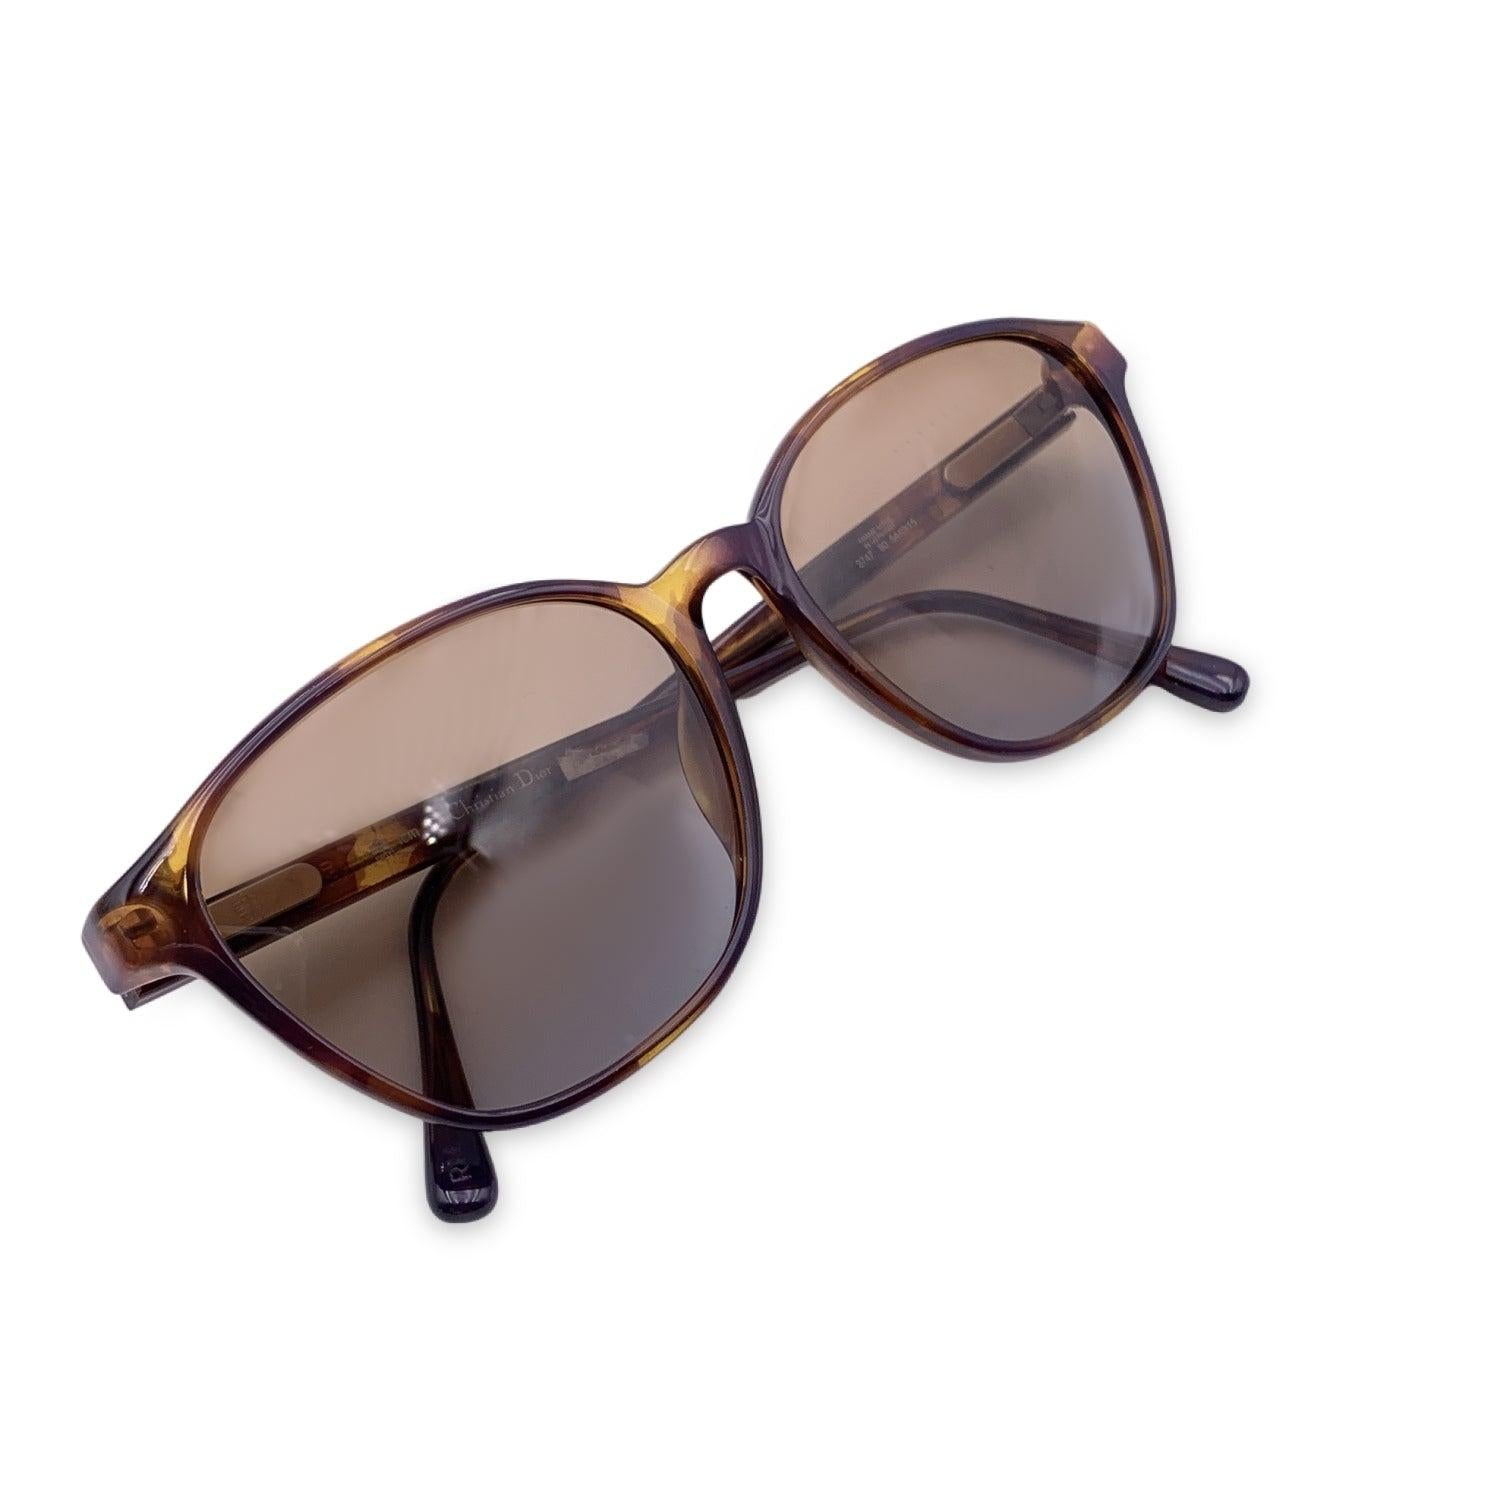 Vintage Christian Dior Women Sunglasses, Mod. 2747 80 Optyl. Size: 54/15 140mm. Brown acetate frame, with CD logo con temples . 100% Total UVA/UVB protection brown gradient lenses. Condition A+ - MINT Never Worn, no defect or wear. Please ask for